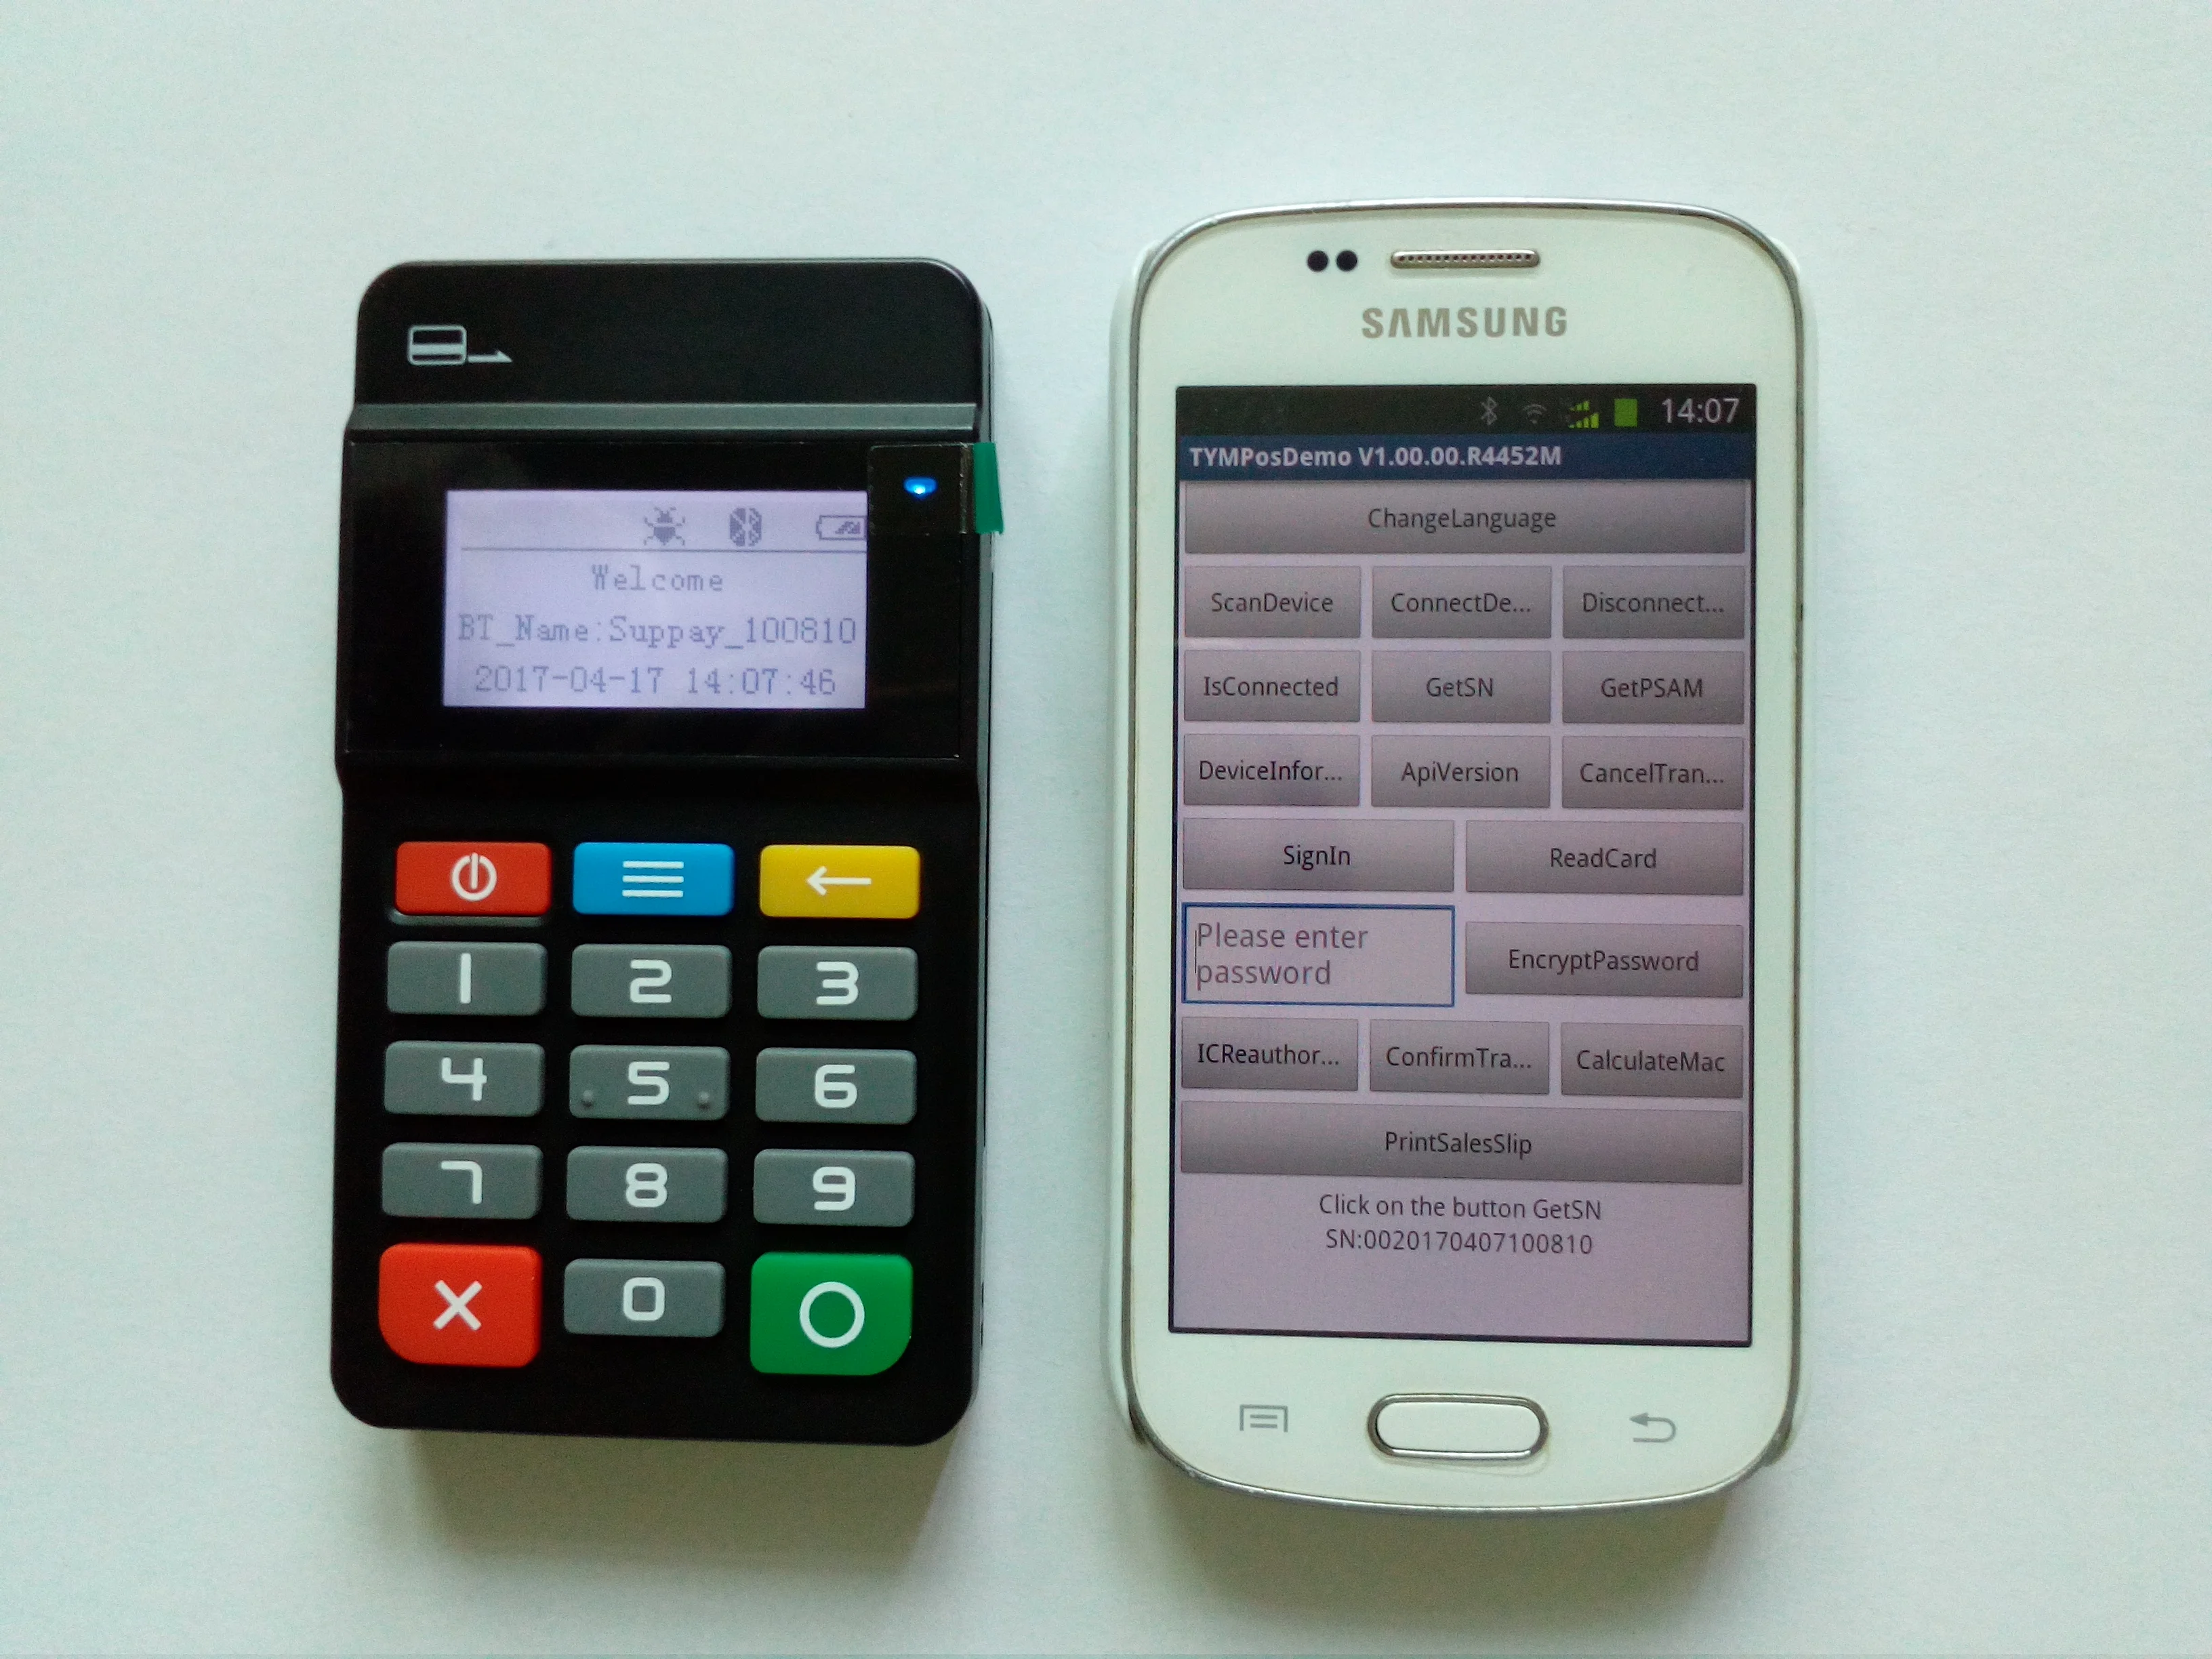 mobile payment terminal pci emv certified bt mpos with keypad m6 plus MSR EMV NFC 3 in 1 mPOS with Bluetooth Pocket POS